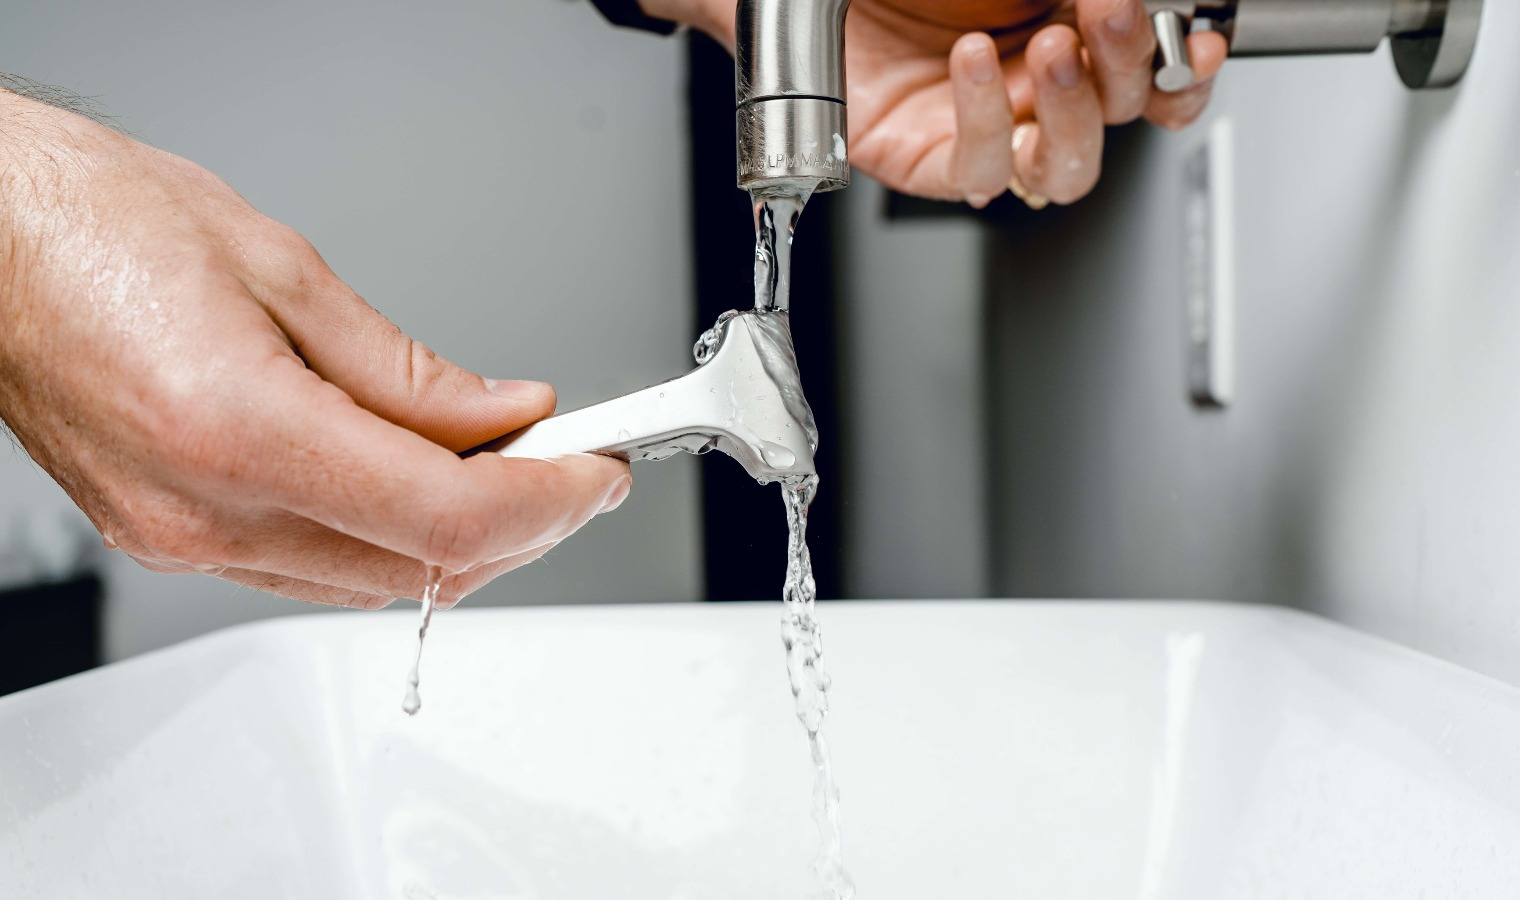 Supply razor being rinsed under water from faucet